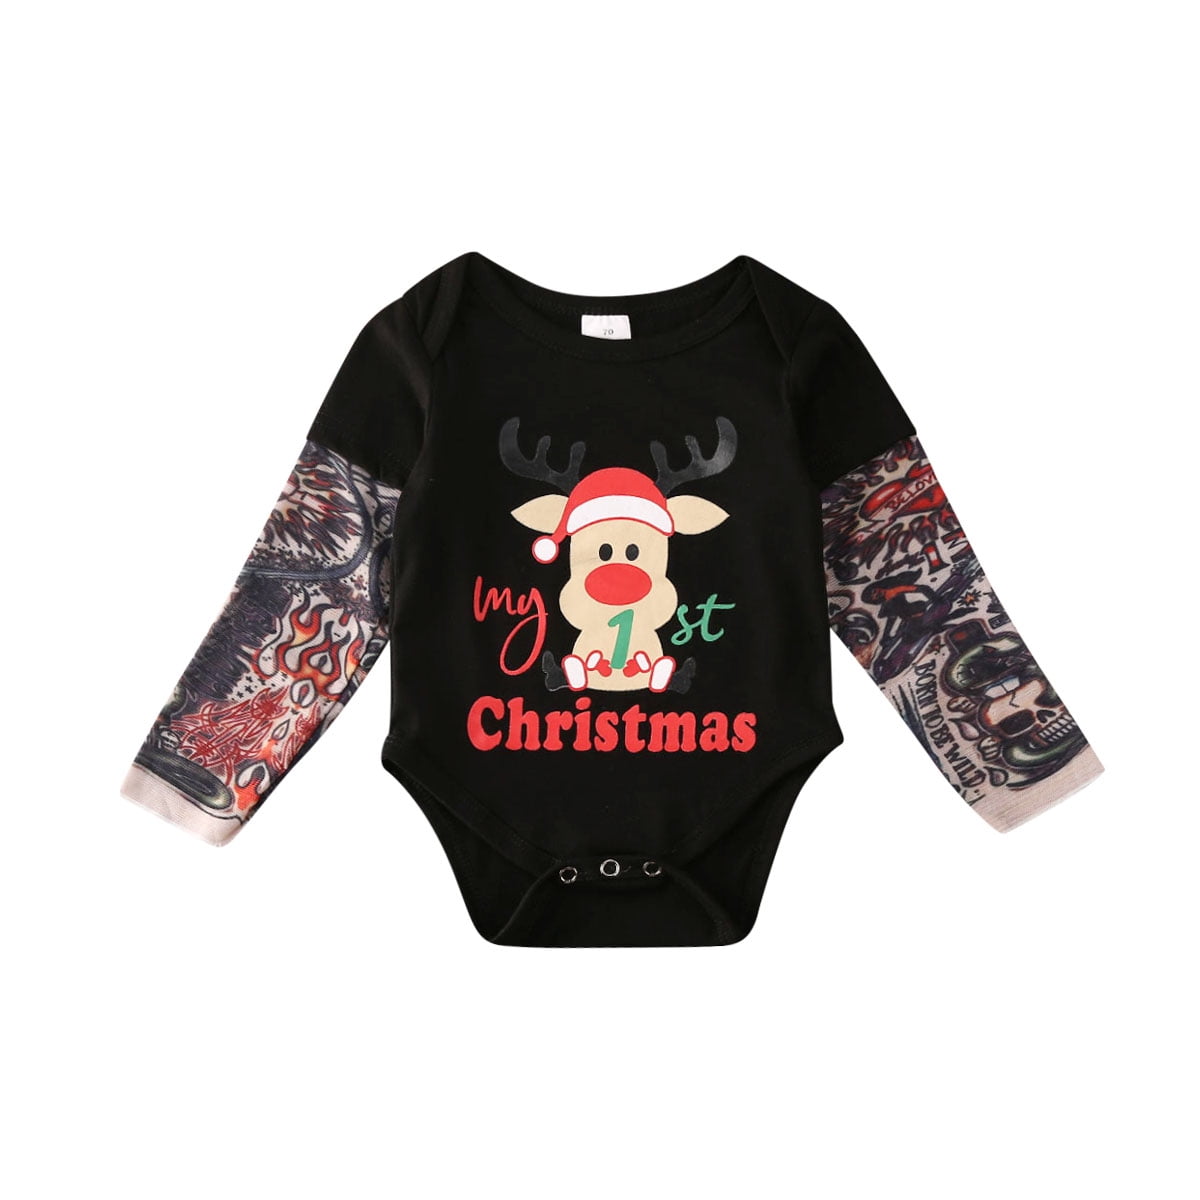 Sunisery My First Christmas Infant Baby Boy Cotton Clothes Tattoo ...